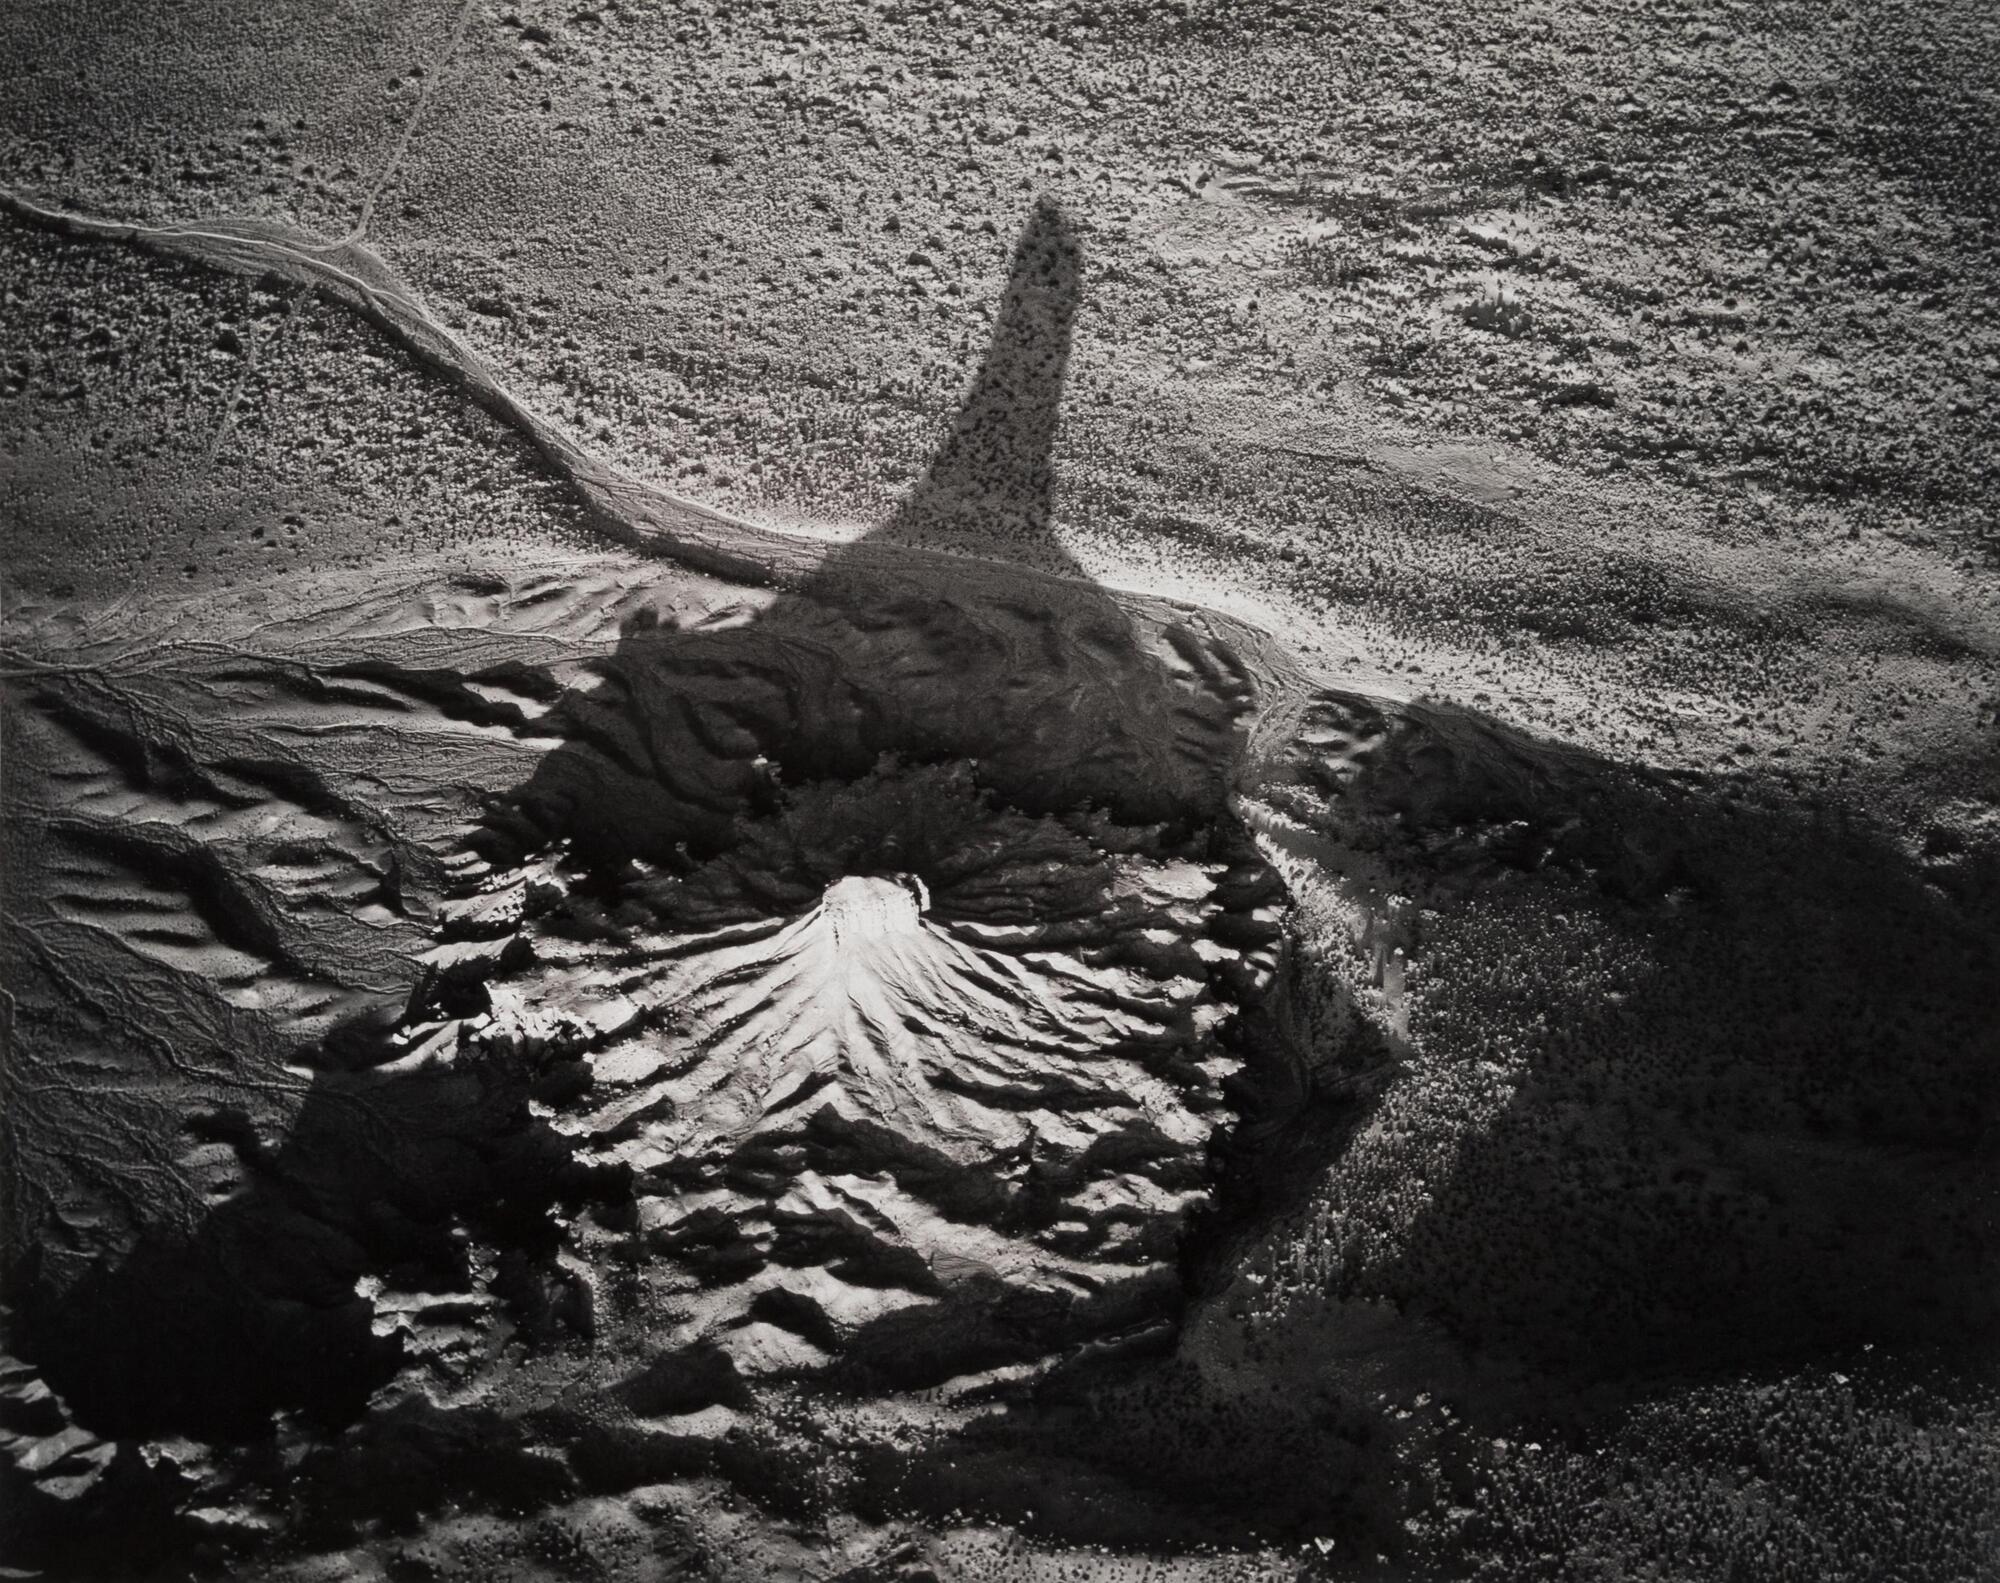 This photograph depicts an aerial view of a spire rock structure casting a long shadow on the surrounding desert.